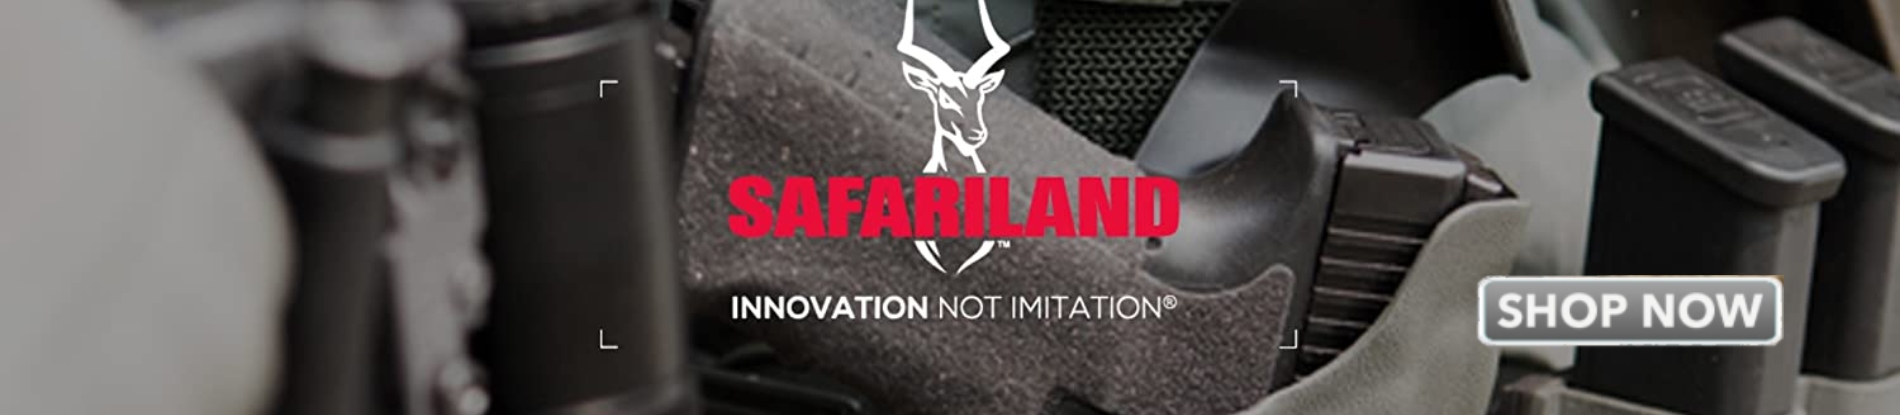 Uniform Works Ltd. - The authorized Canadian distributor of The Safariland  Group.